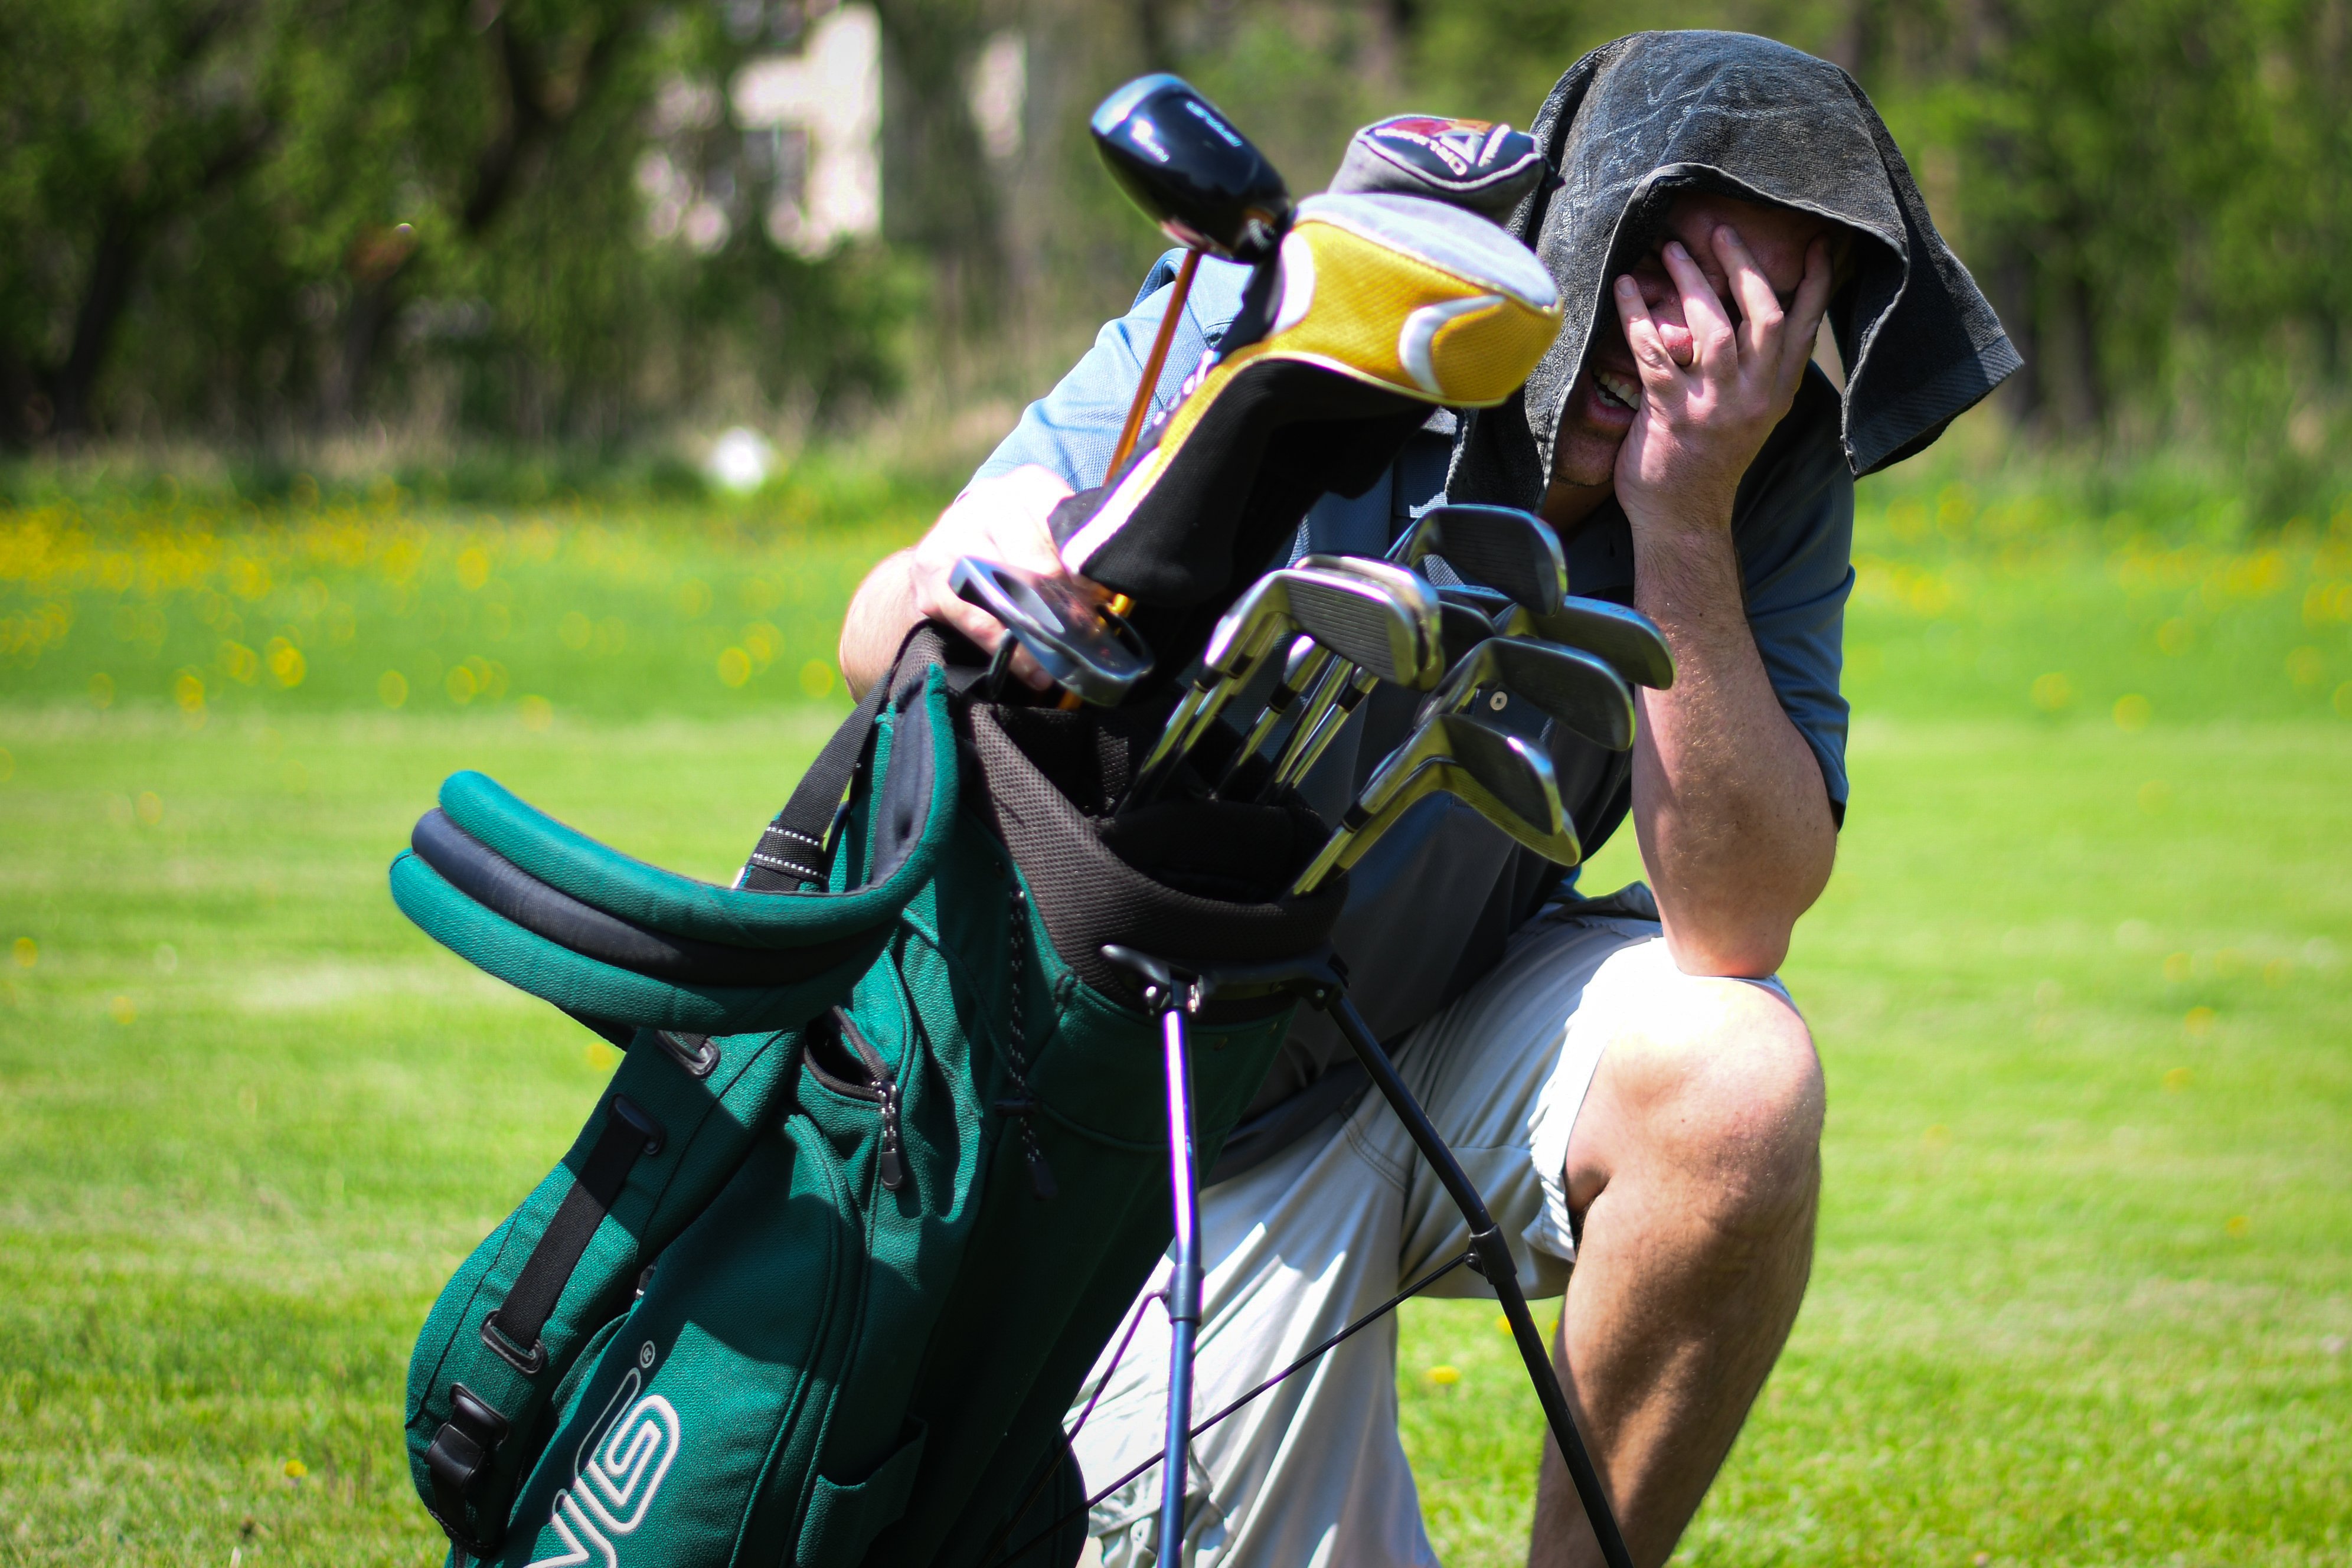 Golfer overheating with cool towel on head